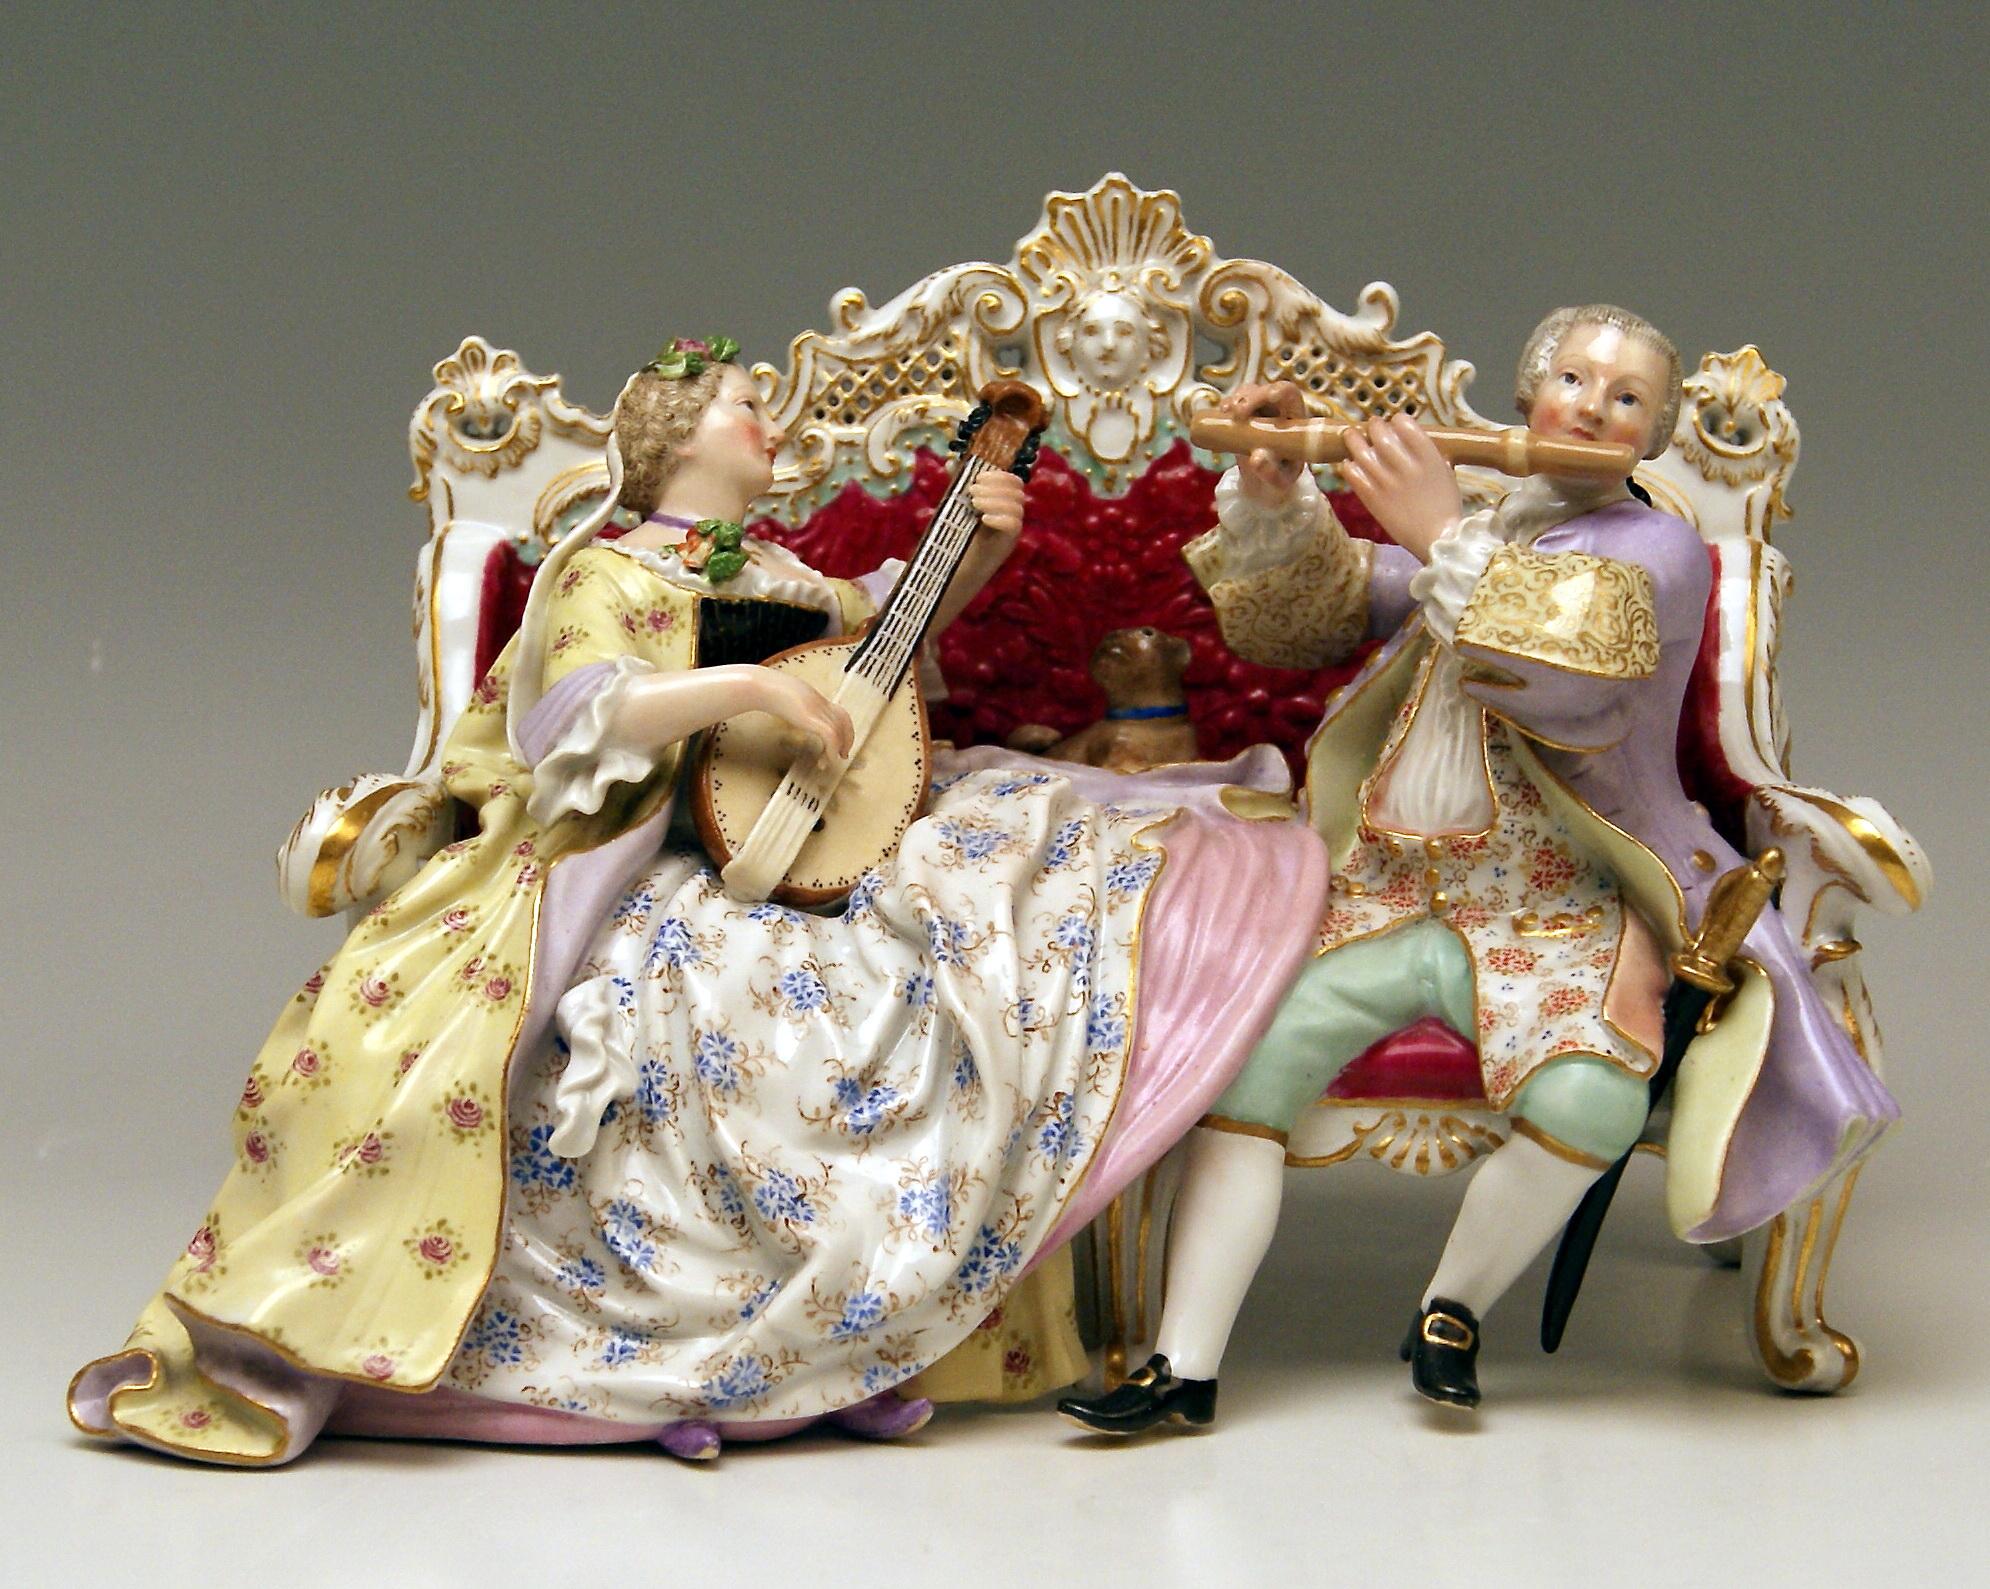 Meissen Gorgeous Group of Gigurines: Gallant couple on settee making music.
The Details Are Stunningly Sculptured = Finest Modelling

Manufactory: Meissen 
Dating: made circa 1870
Hallmarked: Meissen Mark with Pommels on Hilts (19th